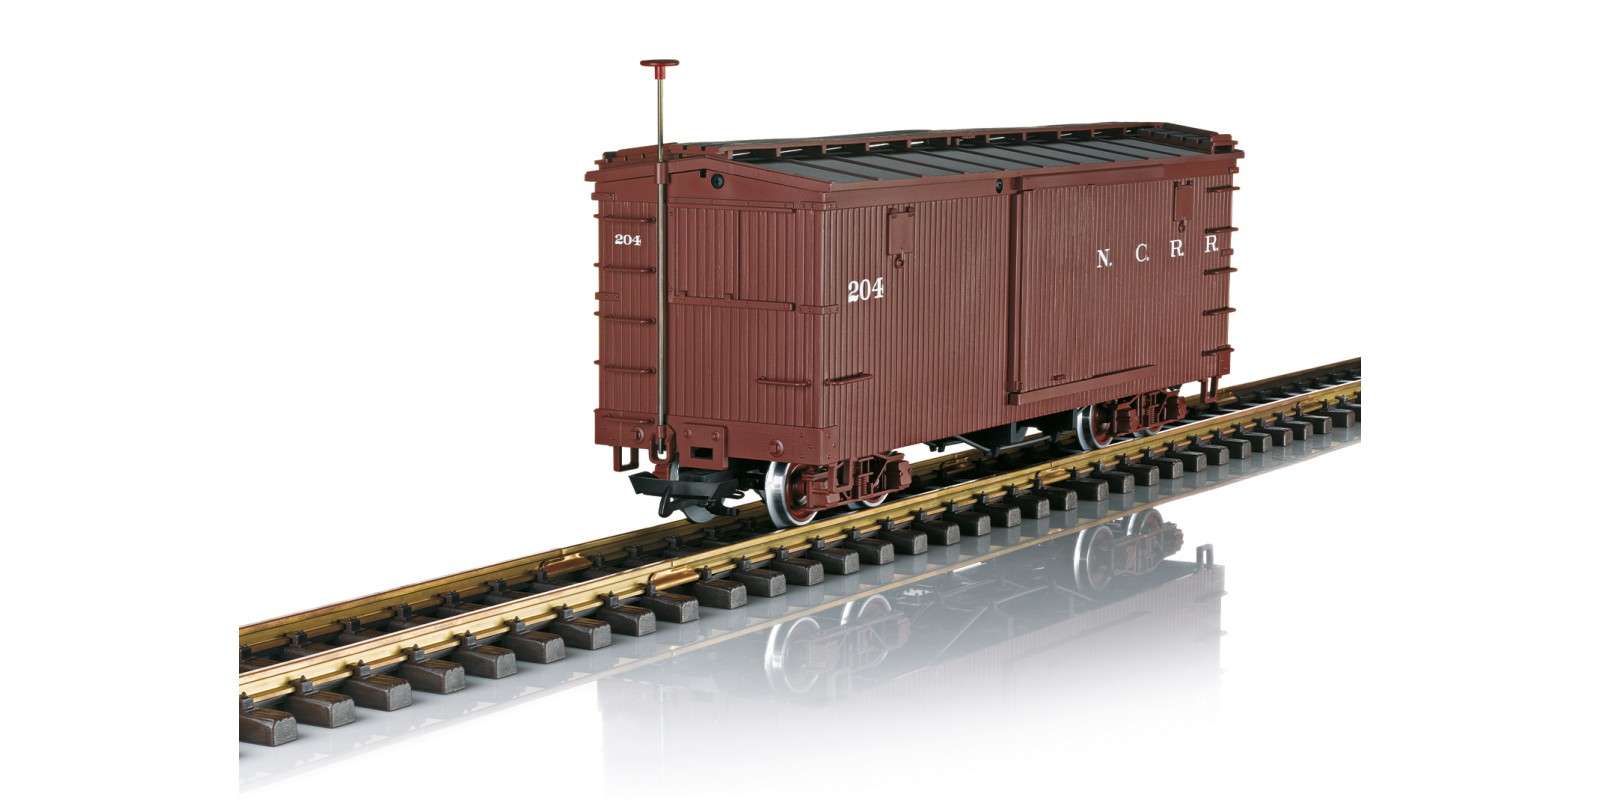 L48676 NCRR Freight Car